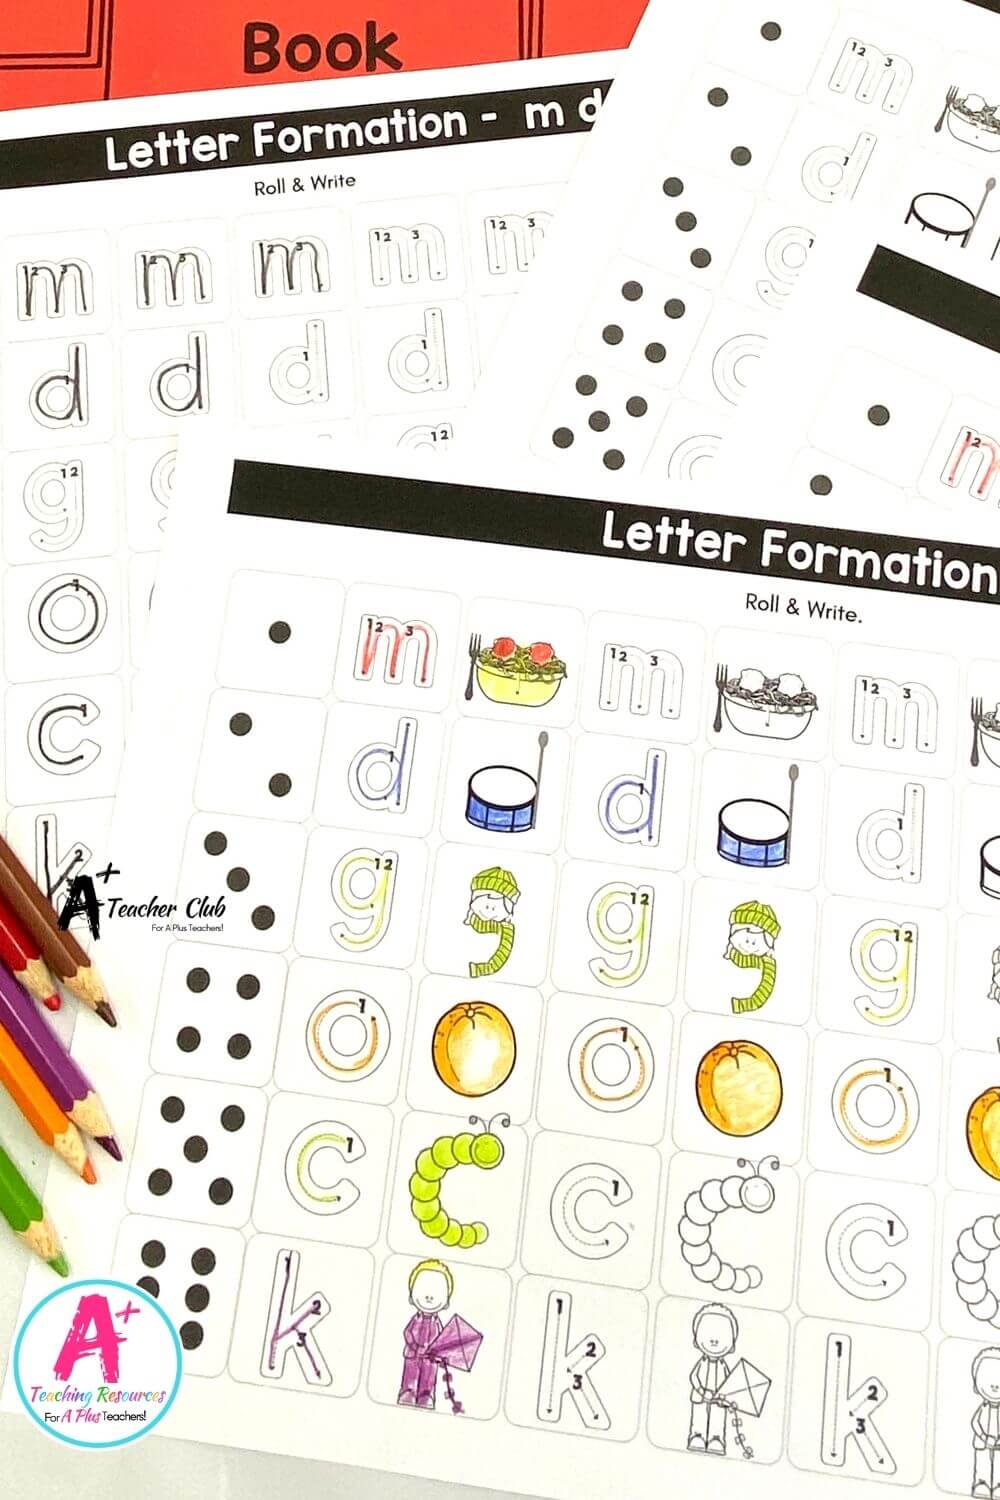 MGDOCK Letter Formation Roll & Colour Dice Games (B&W)